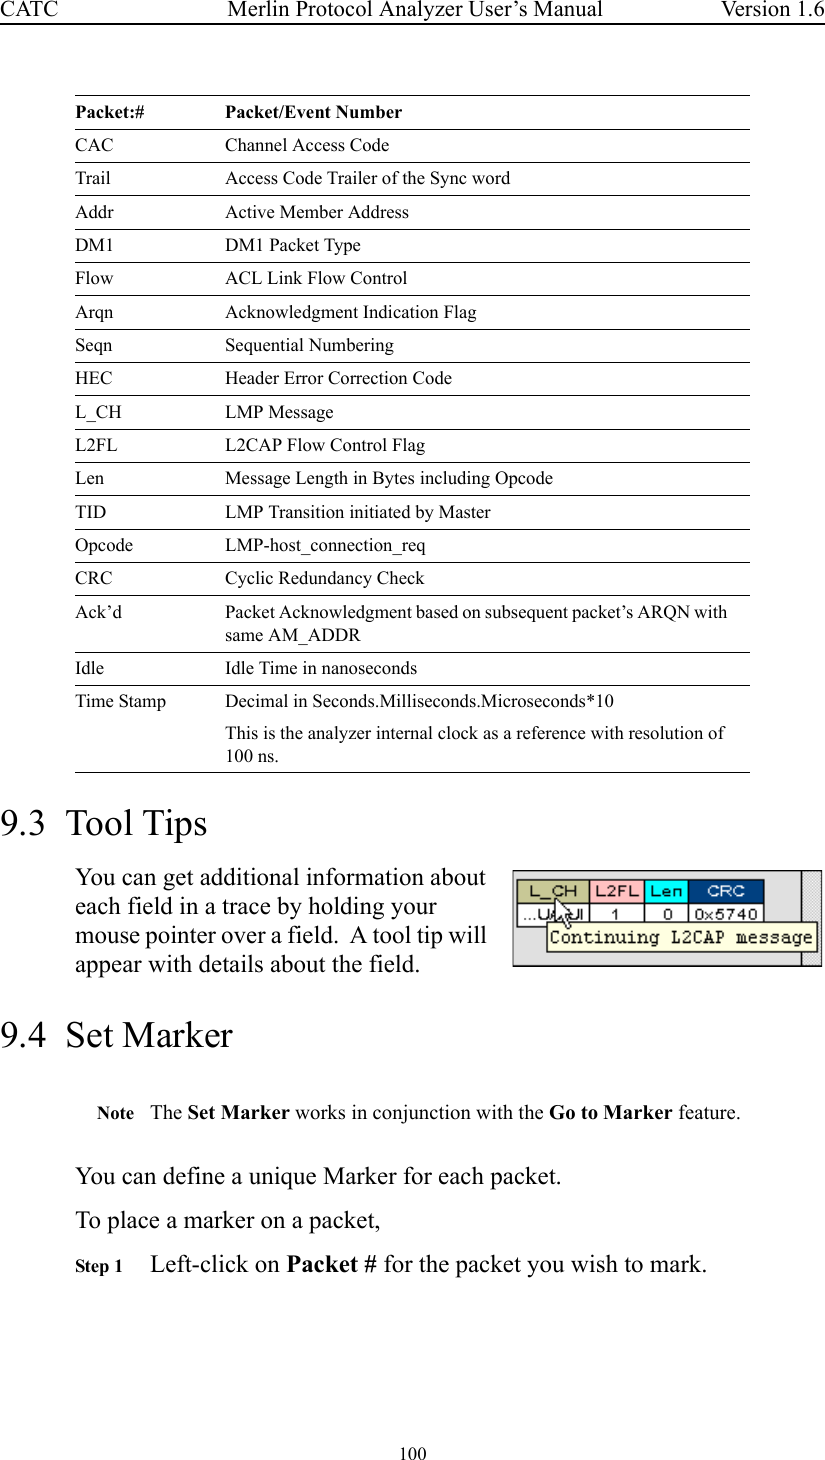 100 Merlin Protocol Analyzer User’s ManualCATC Version 1.69.3  Tool TipsYou can get additional information about each field in a trace by holding your mouse pointer over a field.  A tool tip will appear with details about the field.9.4  Set MarkerNote The Set Marker works in conjunction with the Go to Marker feature.You can define a unique Marker for each packet. To place a marker on a packet,Step 1 Left-click on Packet # for the packet you wish to mark.CAC Channel Access CodeTrail Access Code Trailer of the Sync wordAddr Active Member AddressDM1 DM1 Packet TypeFlow ACL Link Flow ControlArqn Acknowledgment Indication FlagSeqn Sequential NumberingHEC Header Error Correction CodeL_CH LMP MessageL2FL L2CAP Flow Control FlagLen Message Length in Bytes including OpcodeTID LMP Transition initiated by MasterOpcode LMP-host_connection_reqCRC Cyclic Redundancy CheckAck’d Packet Acknowledgment based on subsequent packet’s ARQN with same AM_ADDRIdle Idle Time in nanosecondsTime Stamp Decimal in Seconds.Milliseconds.Microseconds*10This is the analyzer internal clock as a reference with resolution of 100 ns.Packet:# Packet/Event Number